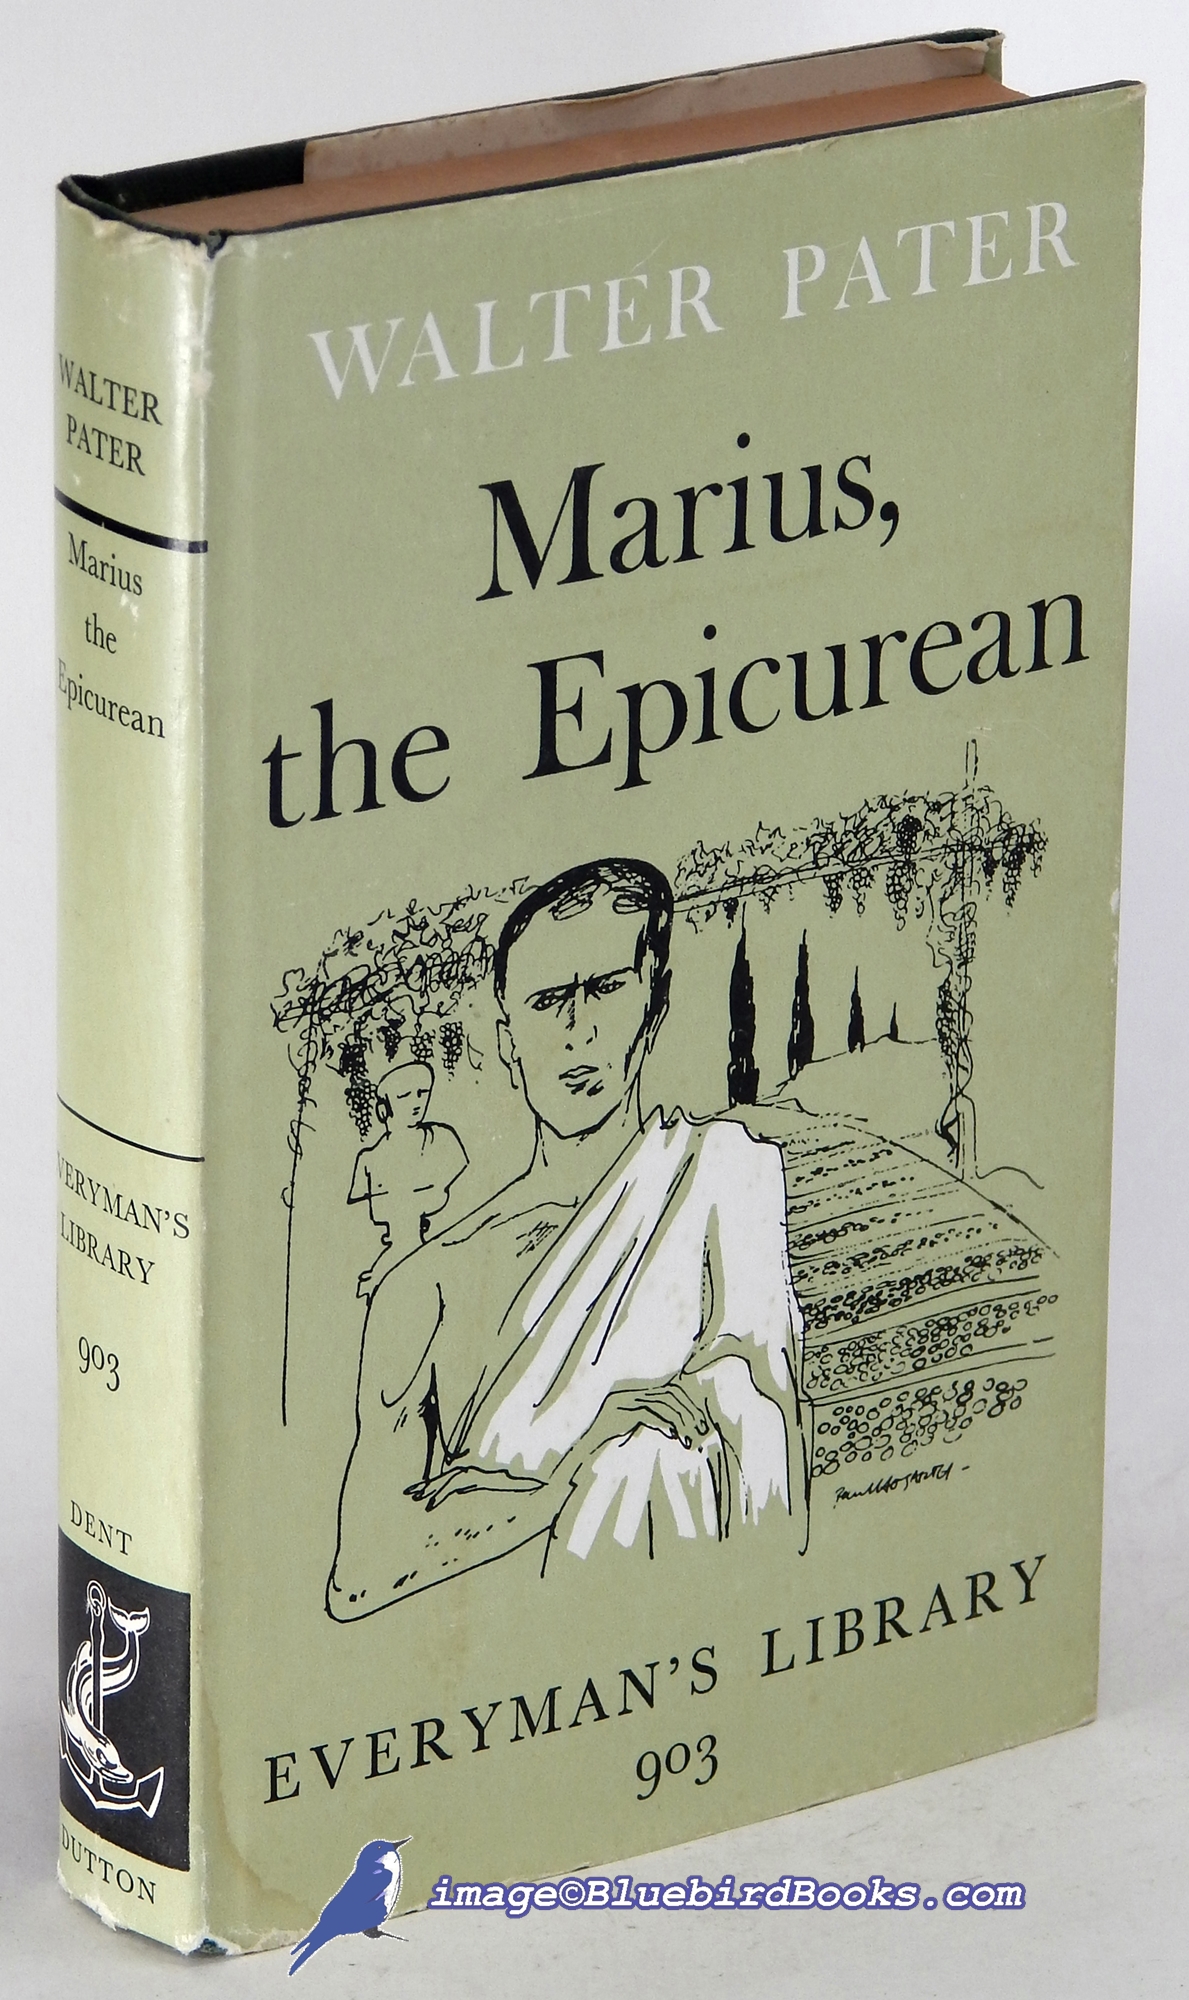 PATER, WALTER - Marius, the Epicurean (Everyman's Library #903)